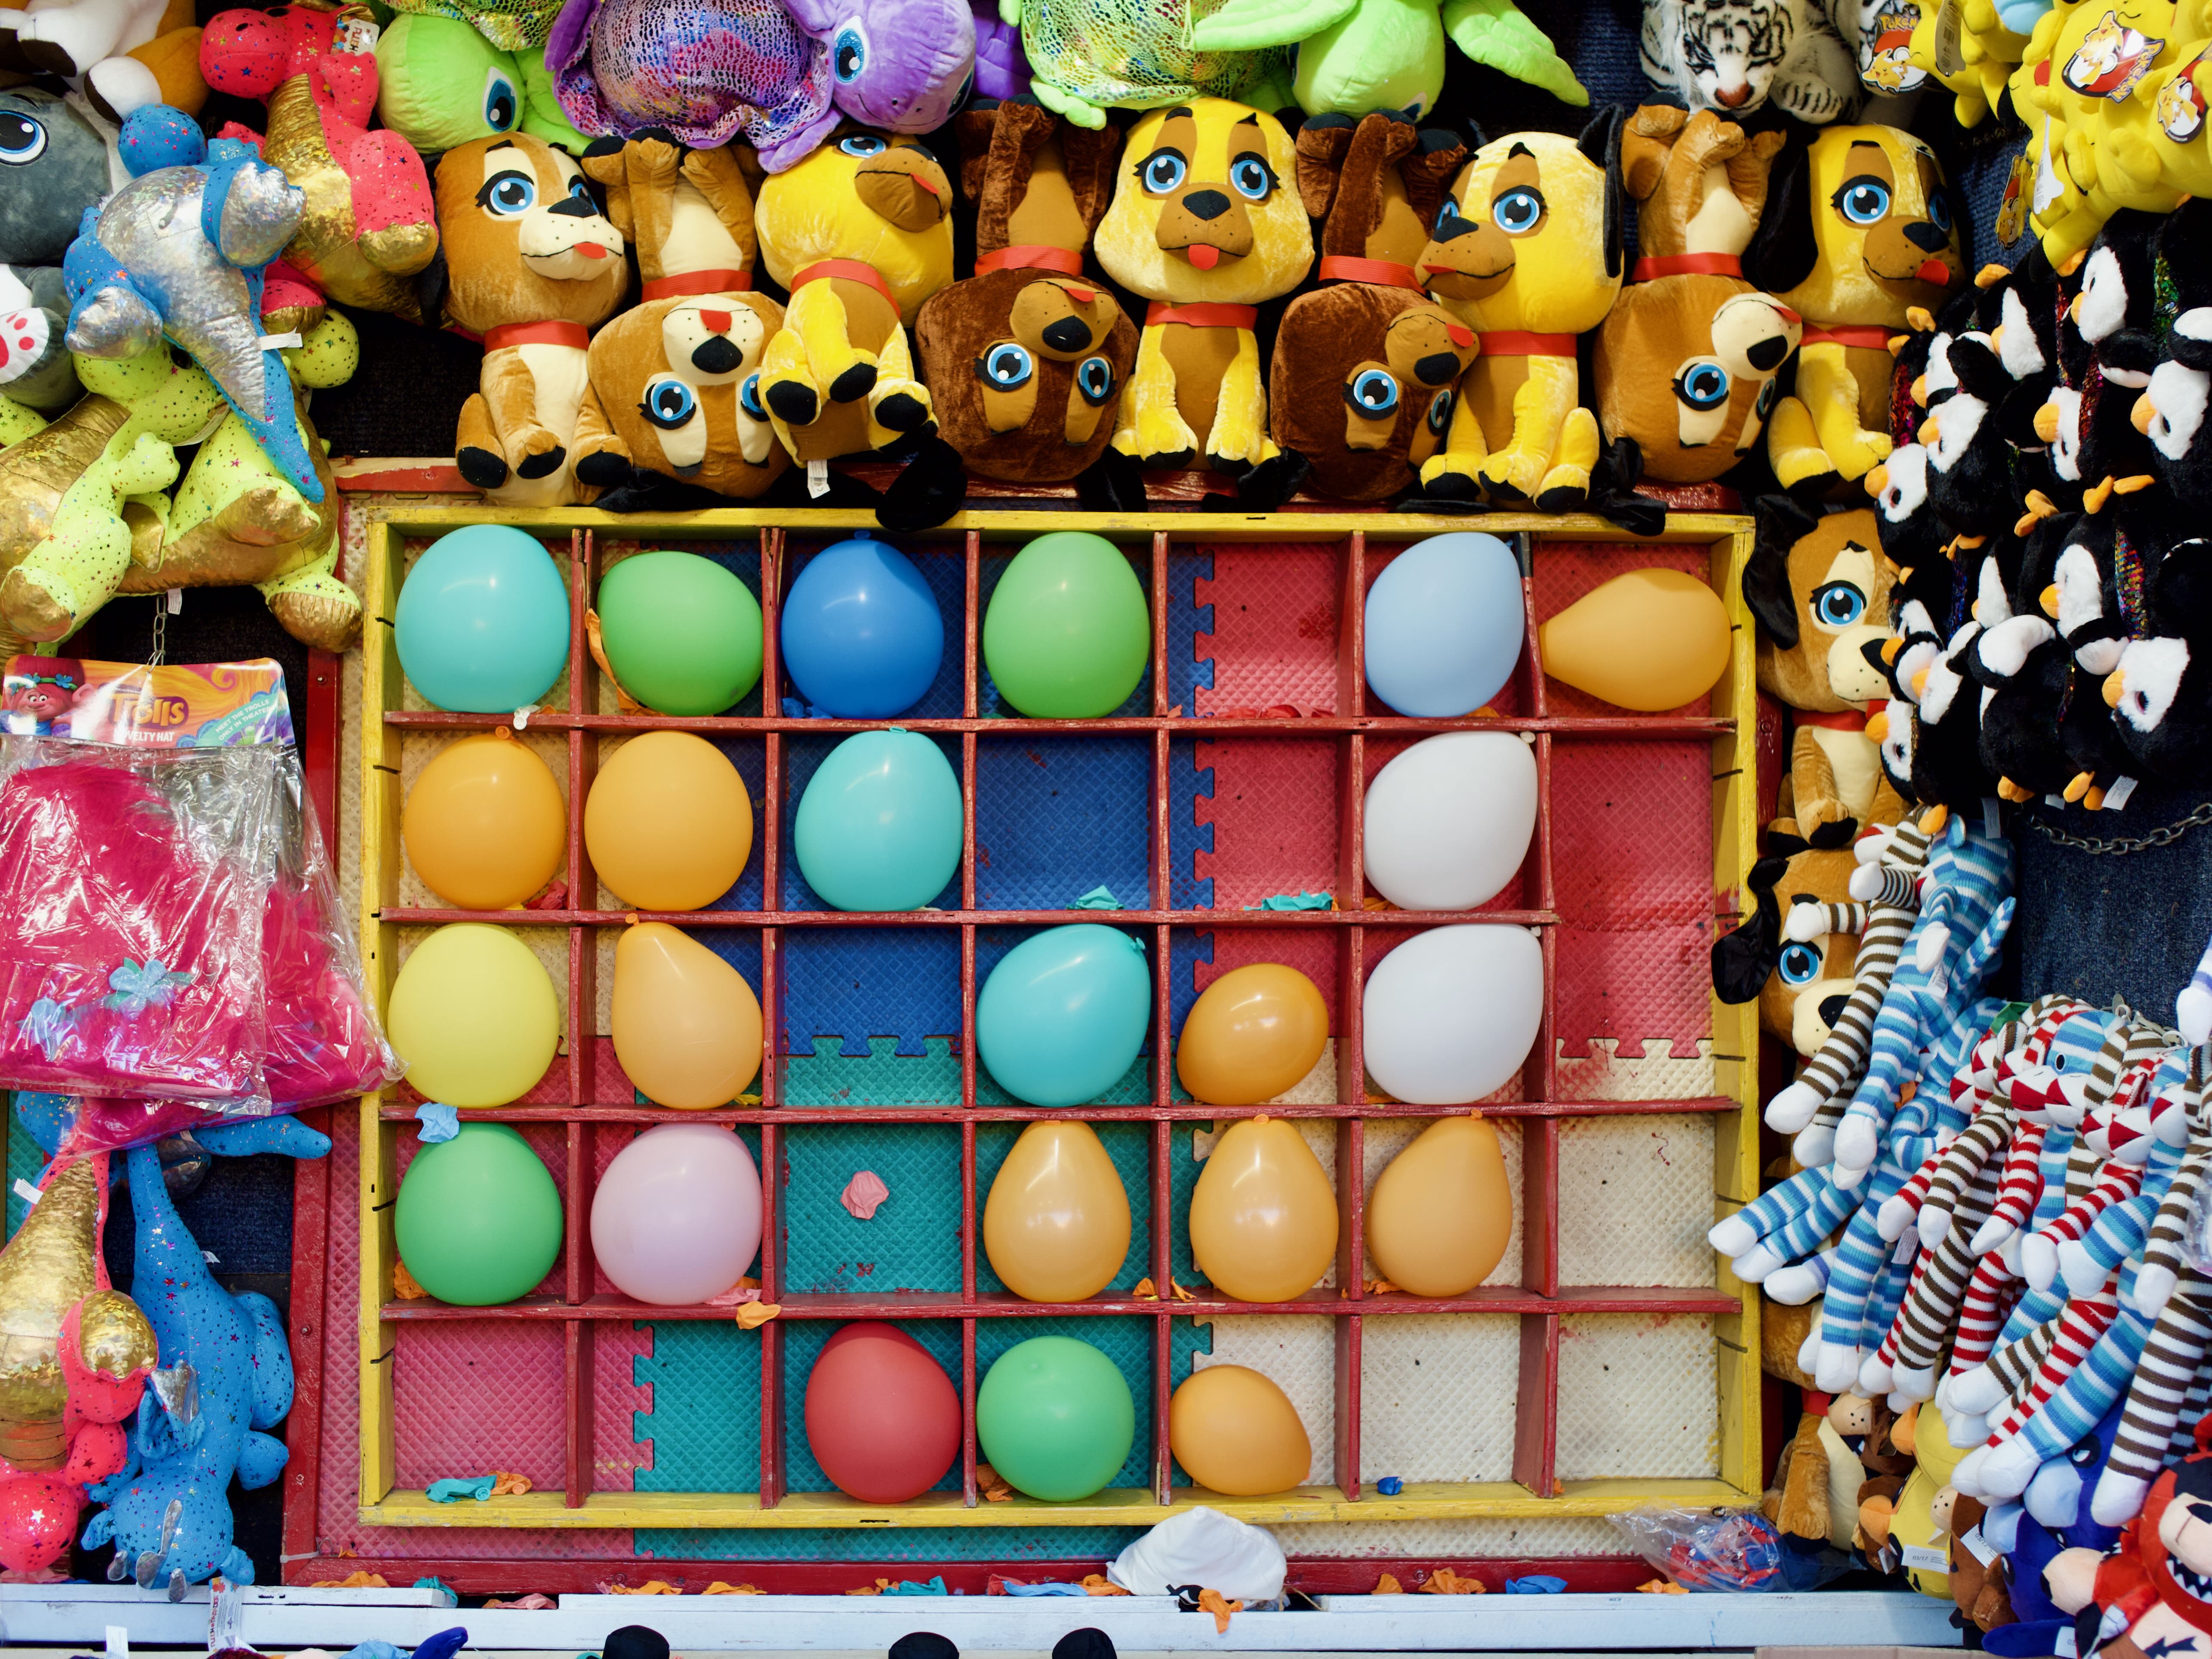 A photograph of multicolored balloons at a small fair.